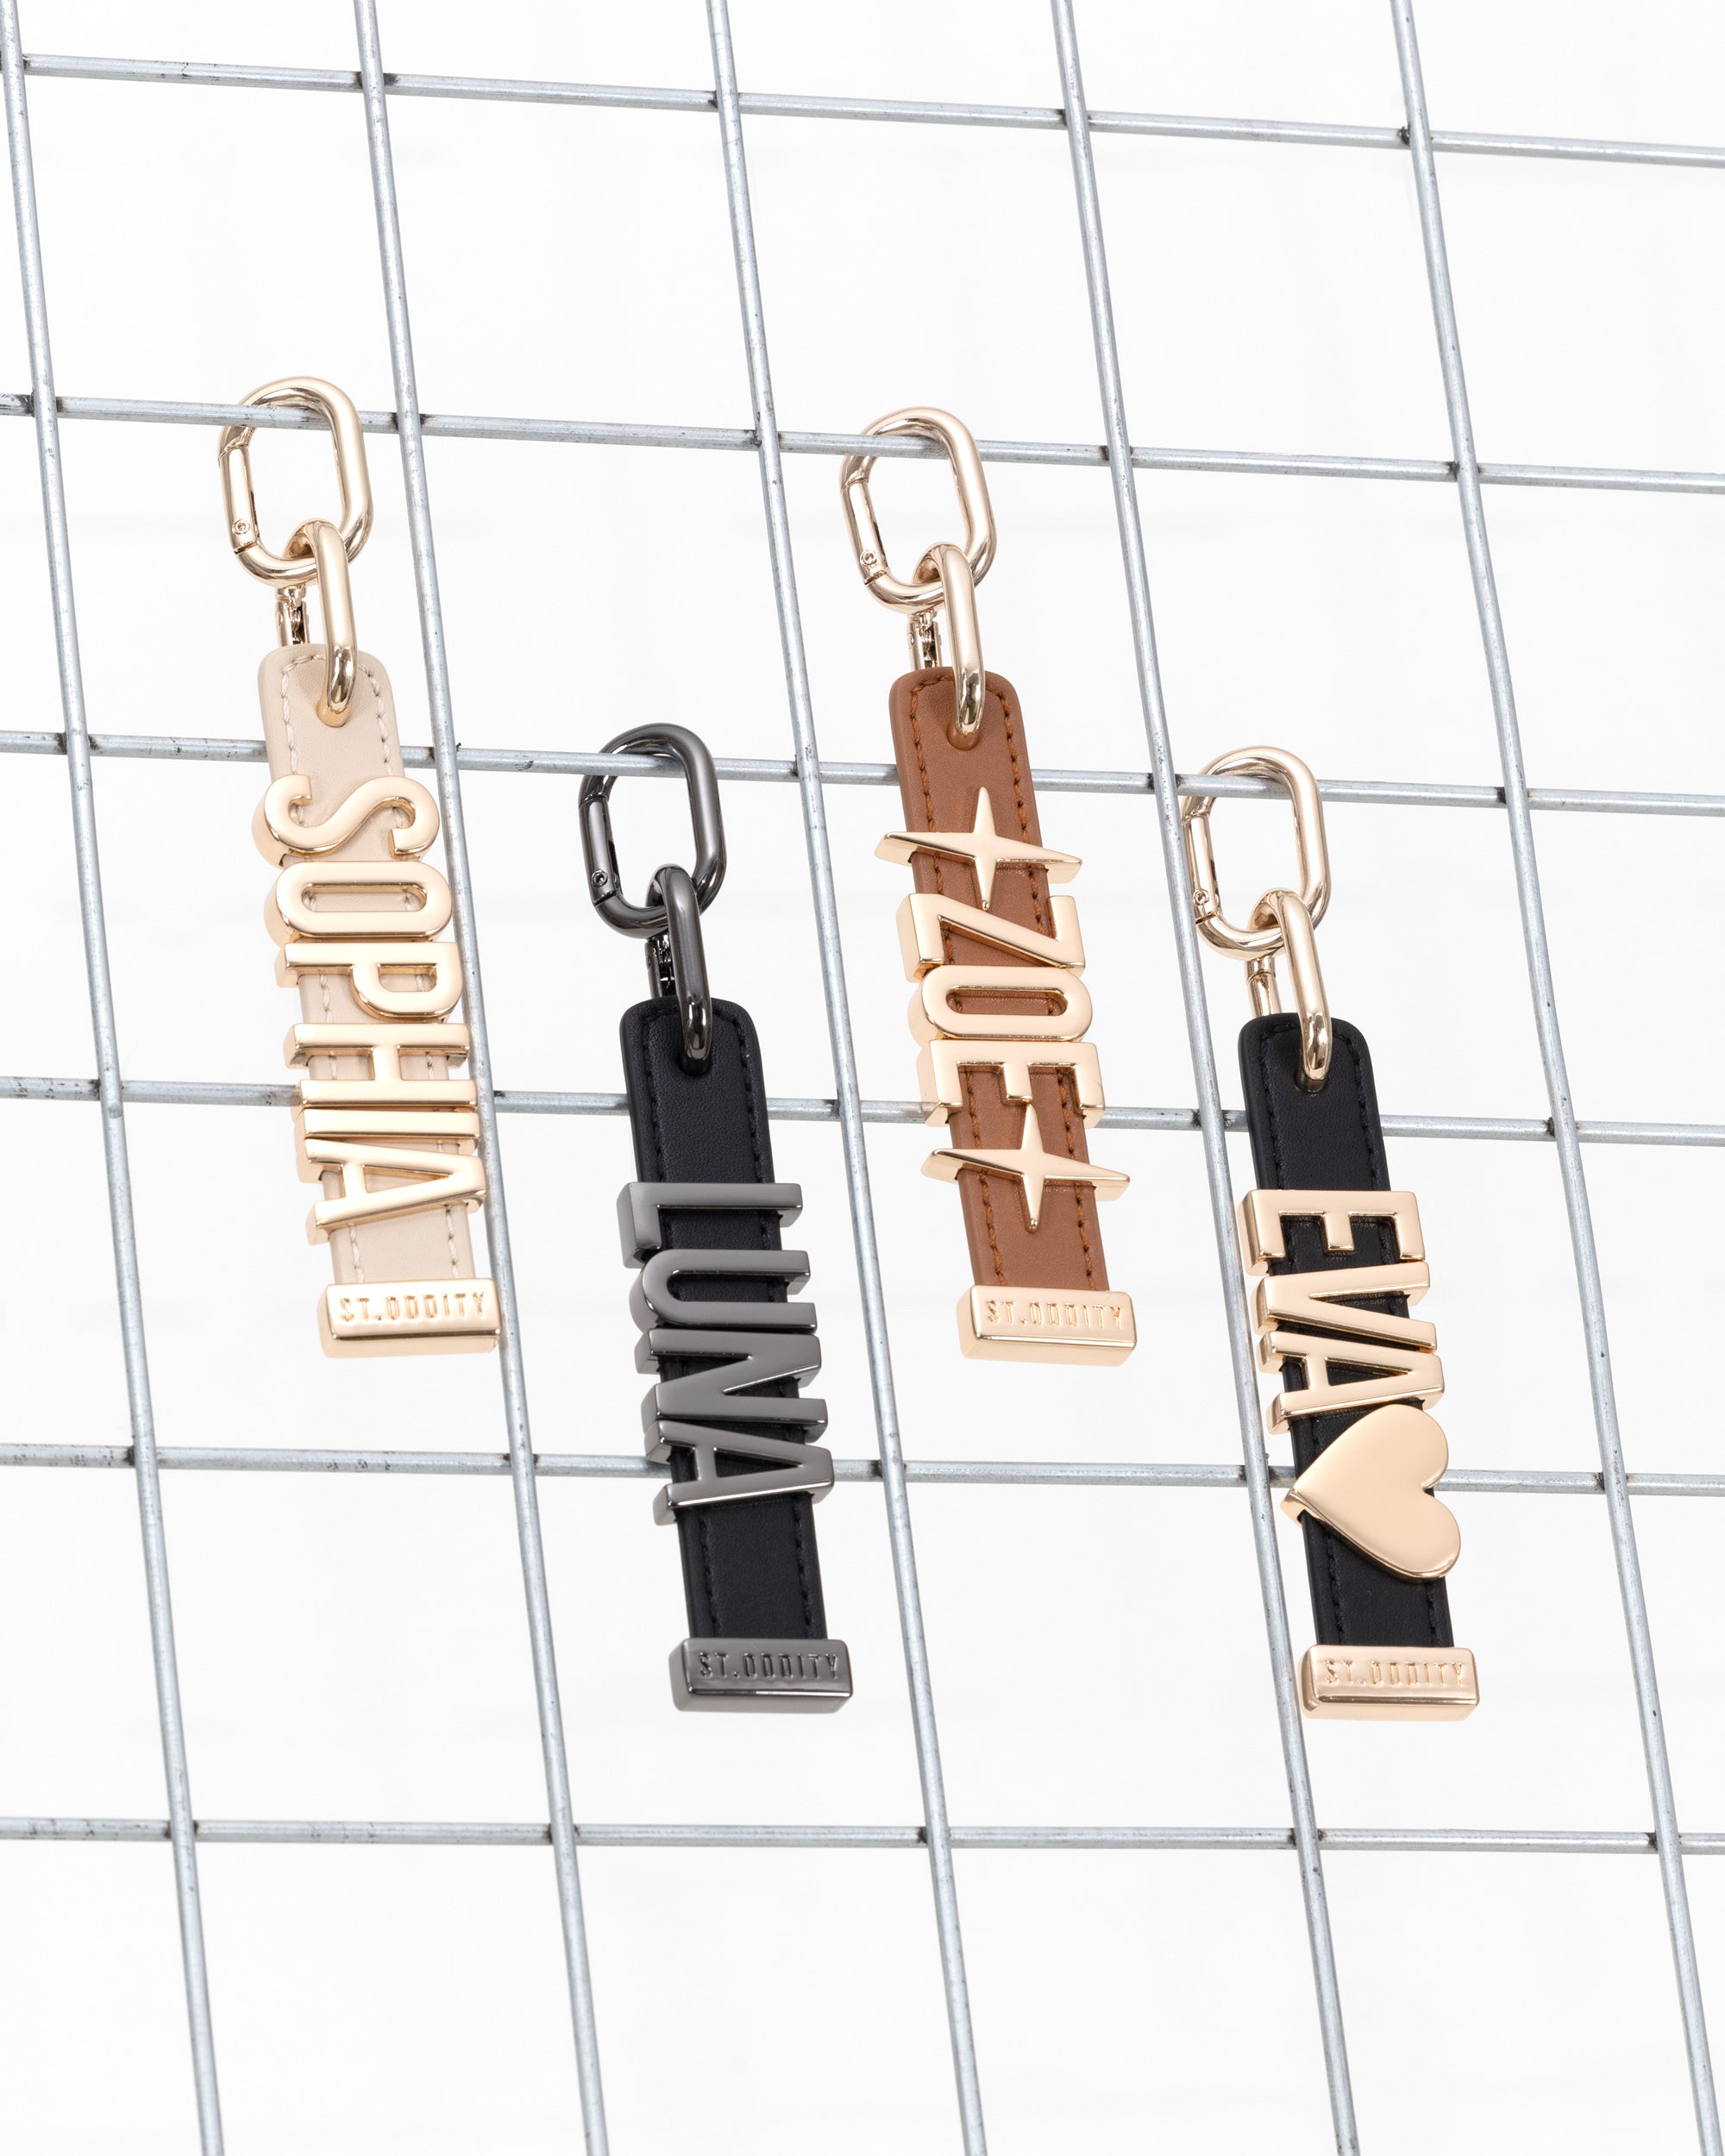 Charm in Light Sand with Personalised Hardware